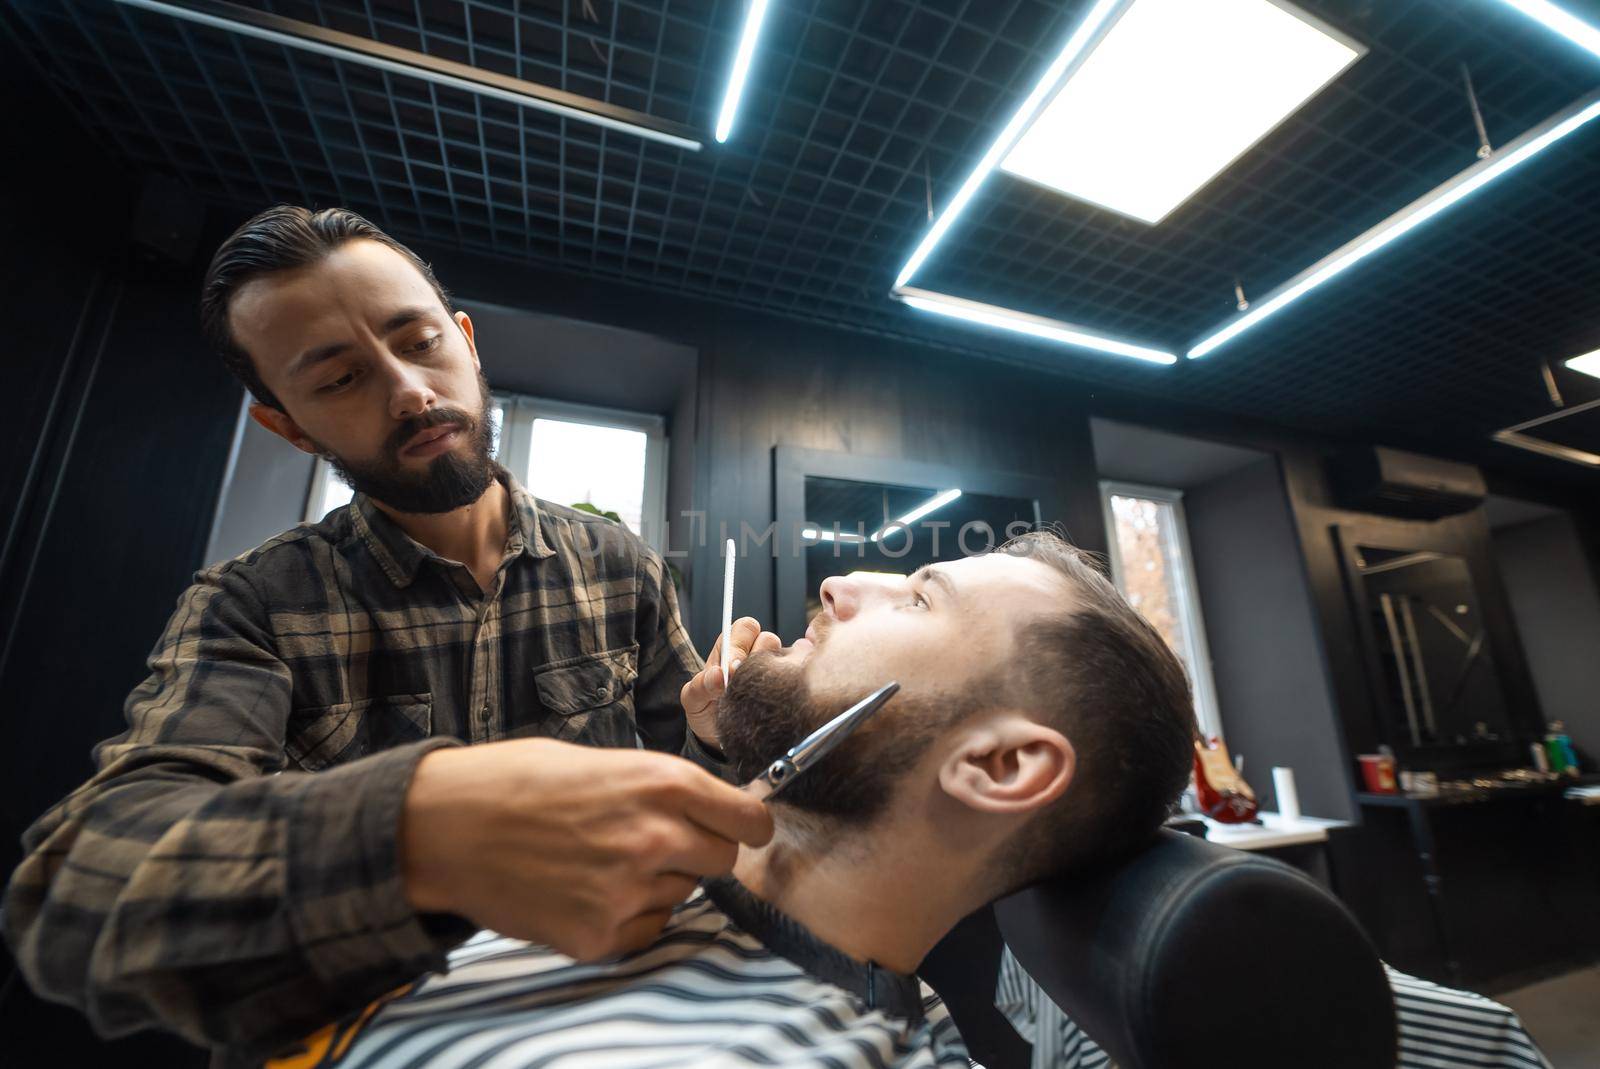 Hairdresser doing haircut of beard using comb and scissors to young attractive man in barbershop